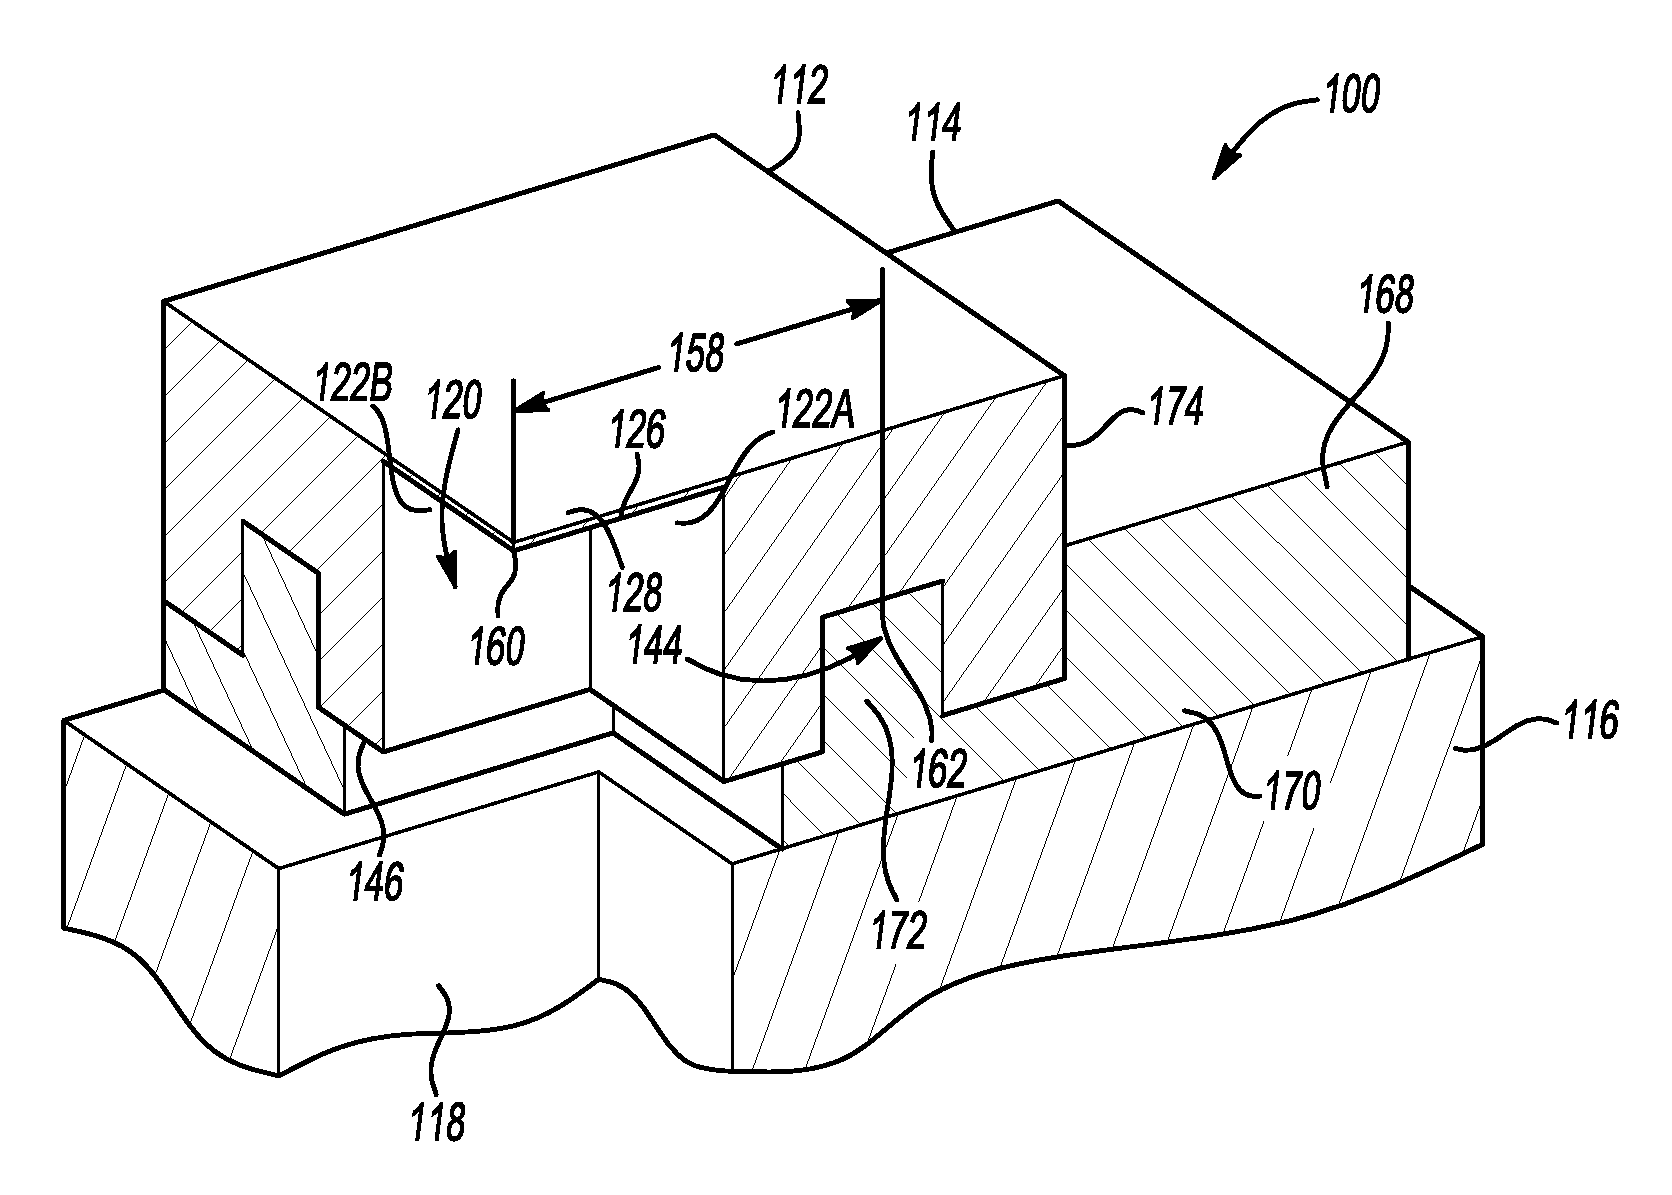 Semiconductor sensing device to minimize thermal noise